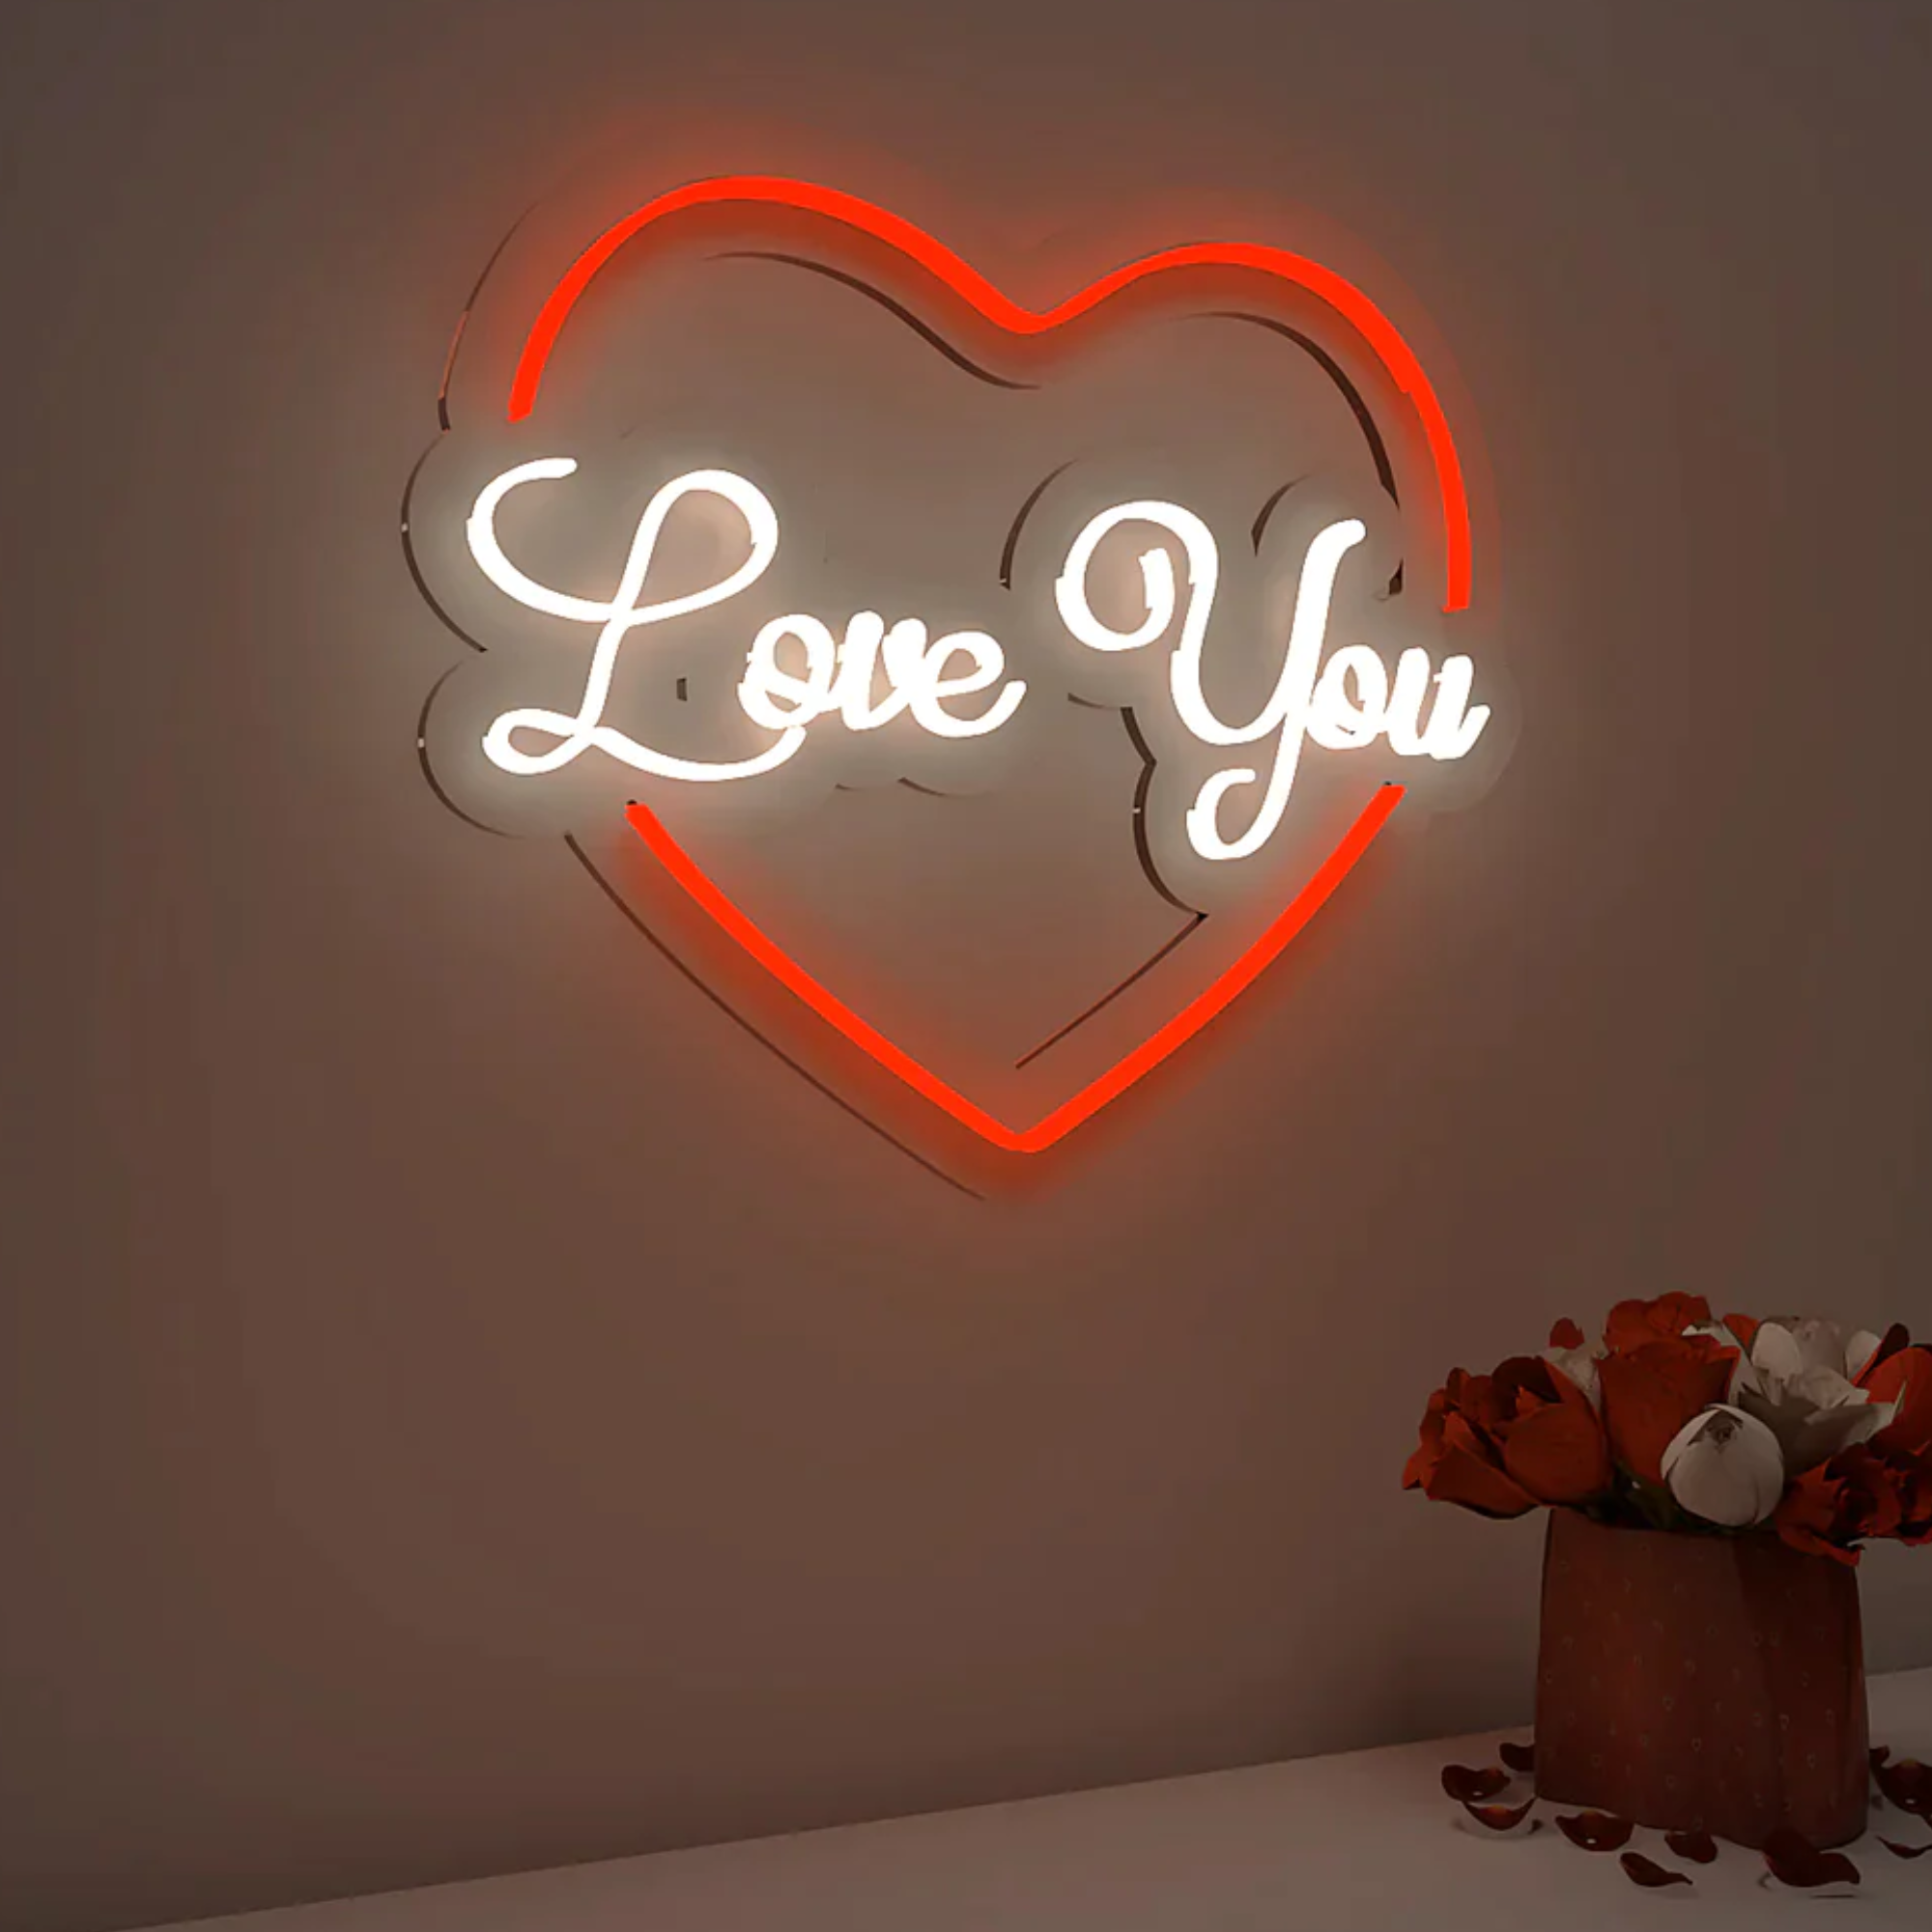 Love You Text in Heart Design Neon LED Light